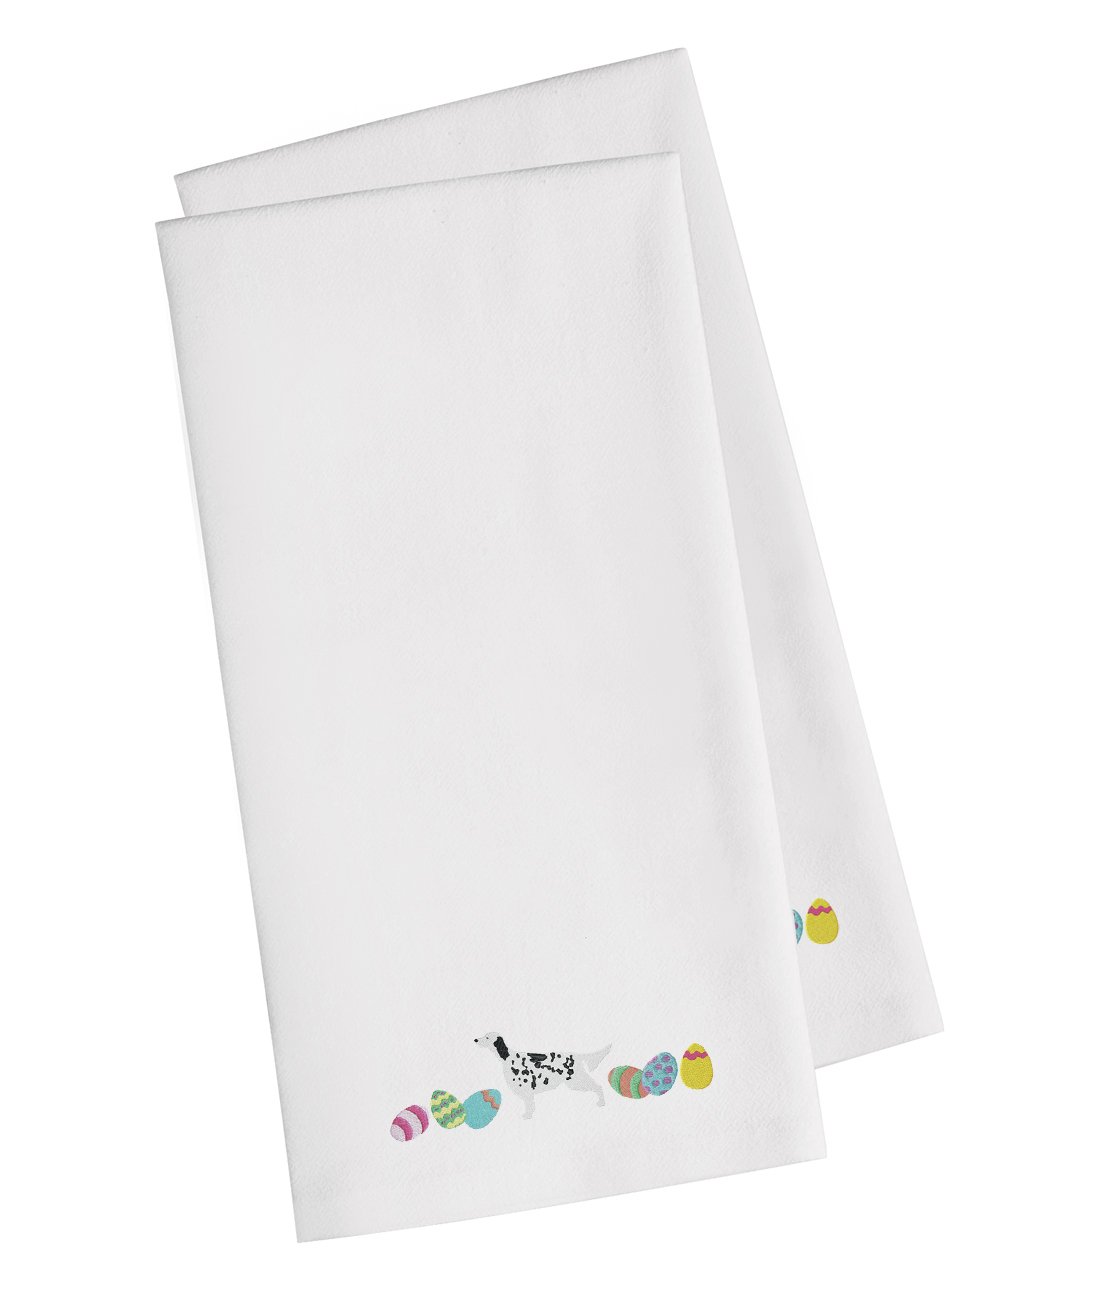 English Setter Easter White Embroidered Kitchen Towel Set of 2 CK1640WHTWE by Caroline's Treasures